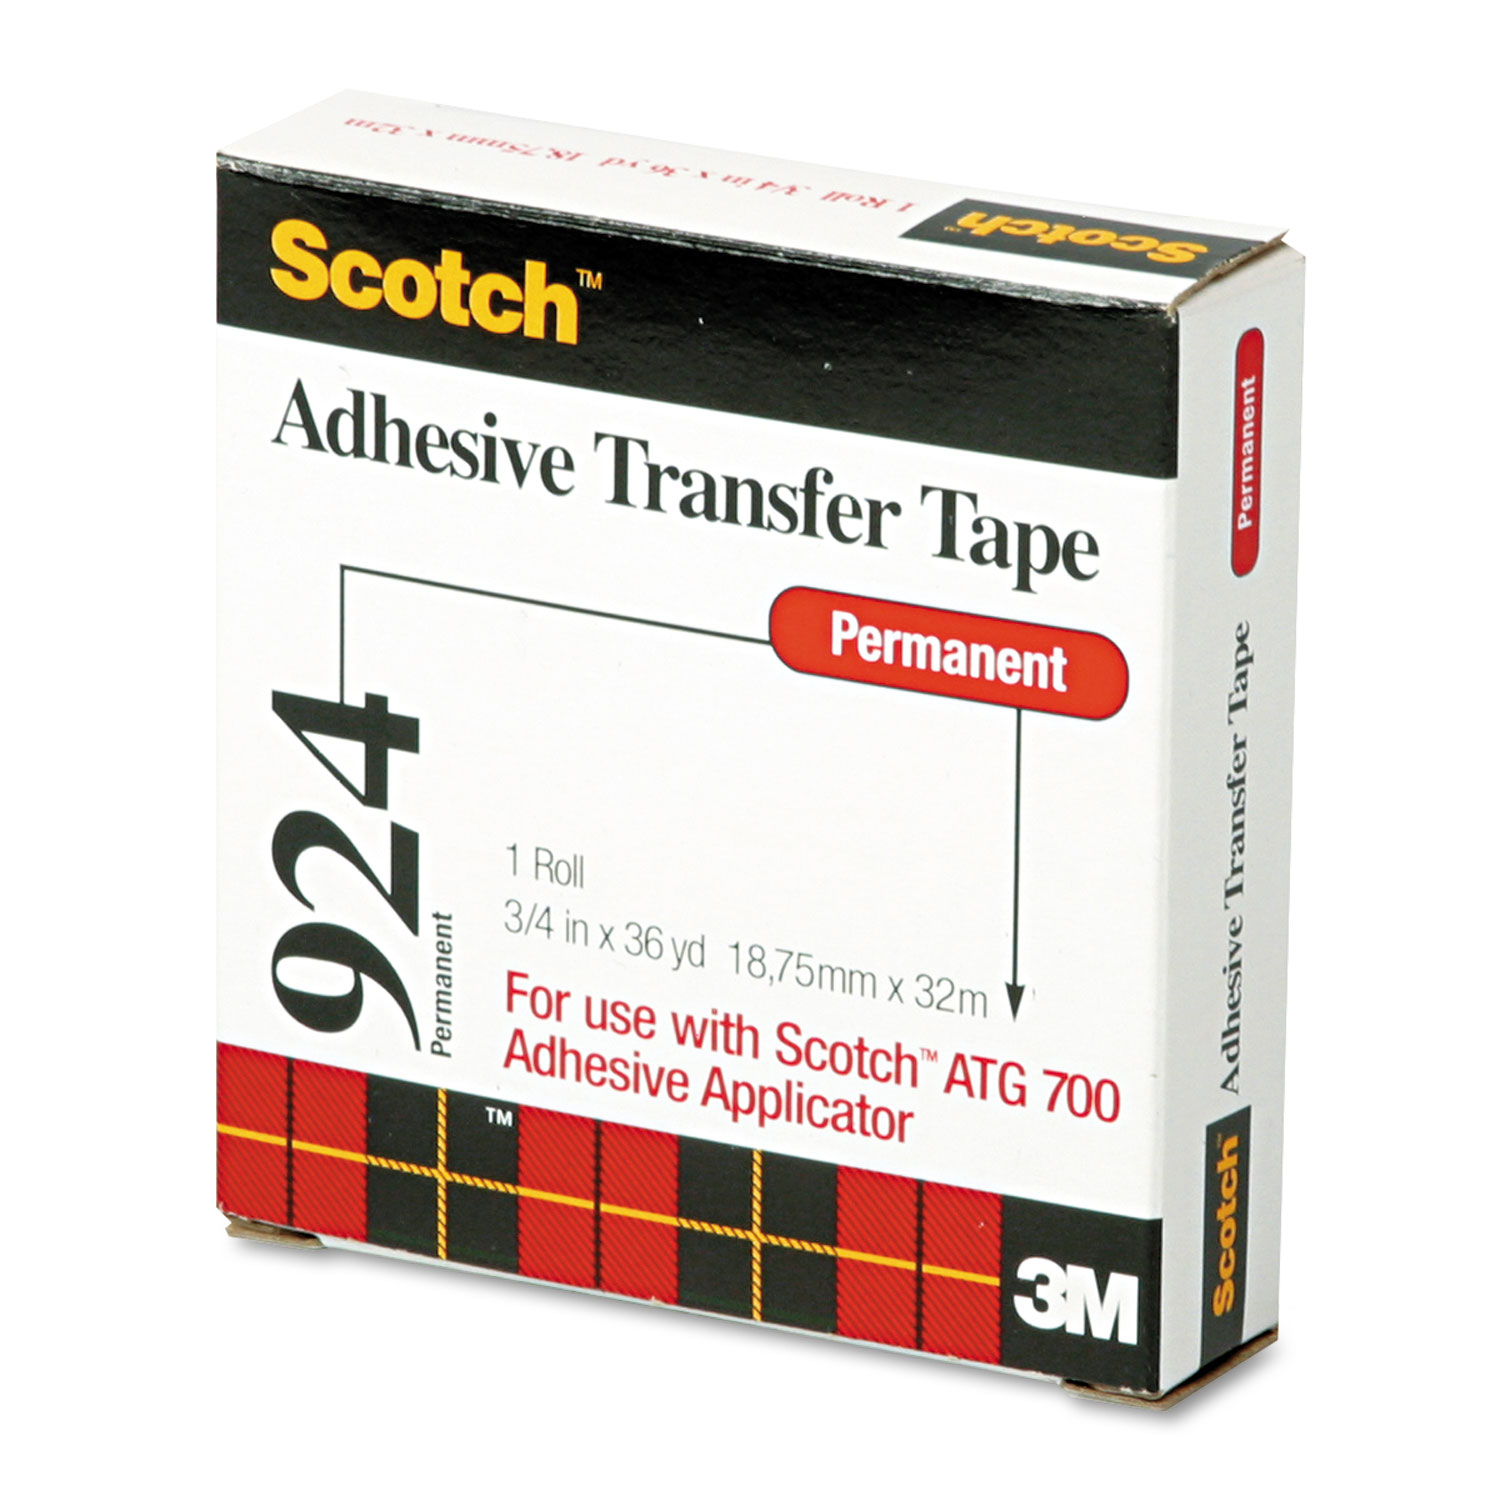  Scotch 924 Adhesive Transfer Tape Roll, 3/4 Wide x 36yds (MMM92434) 